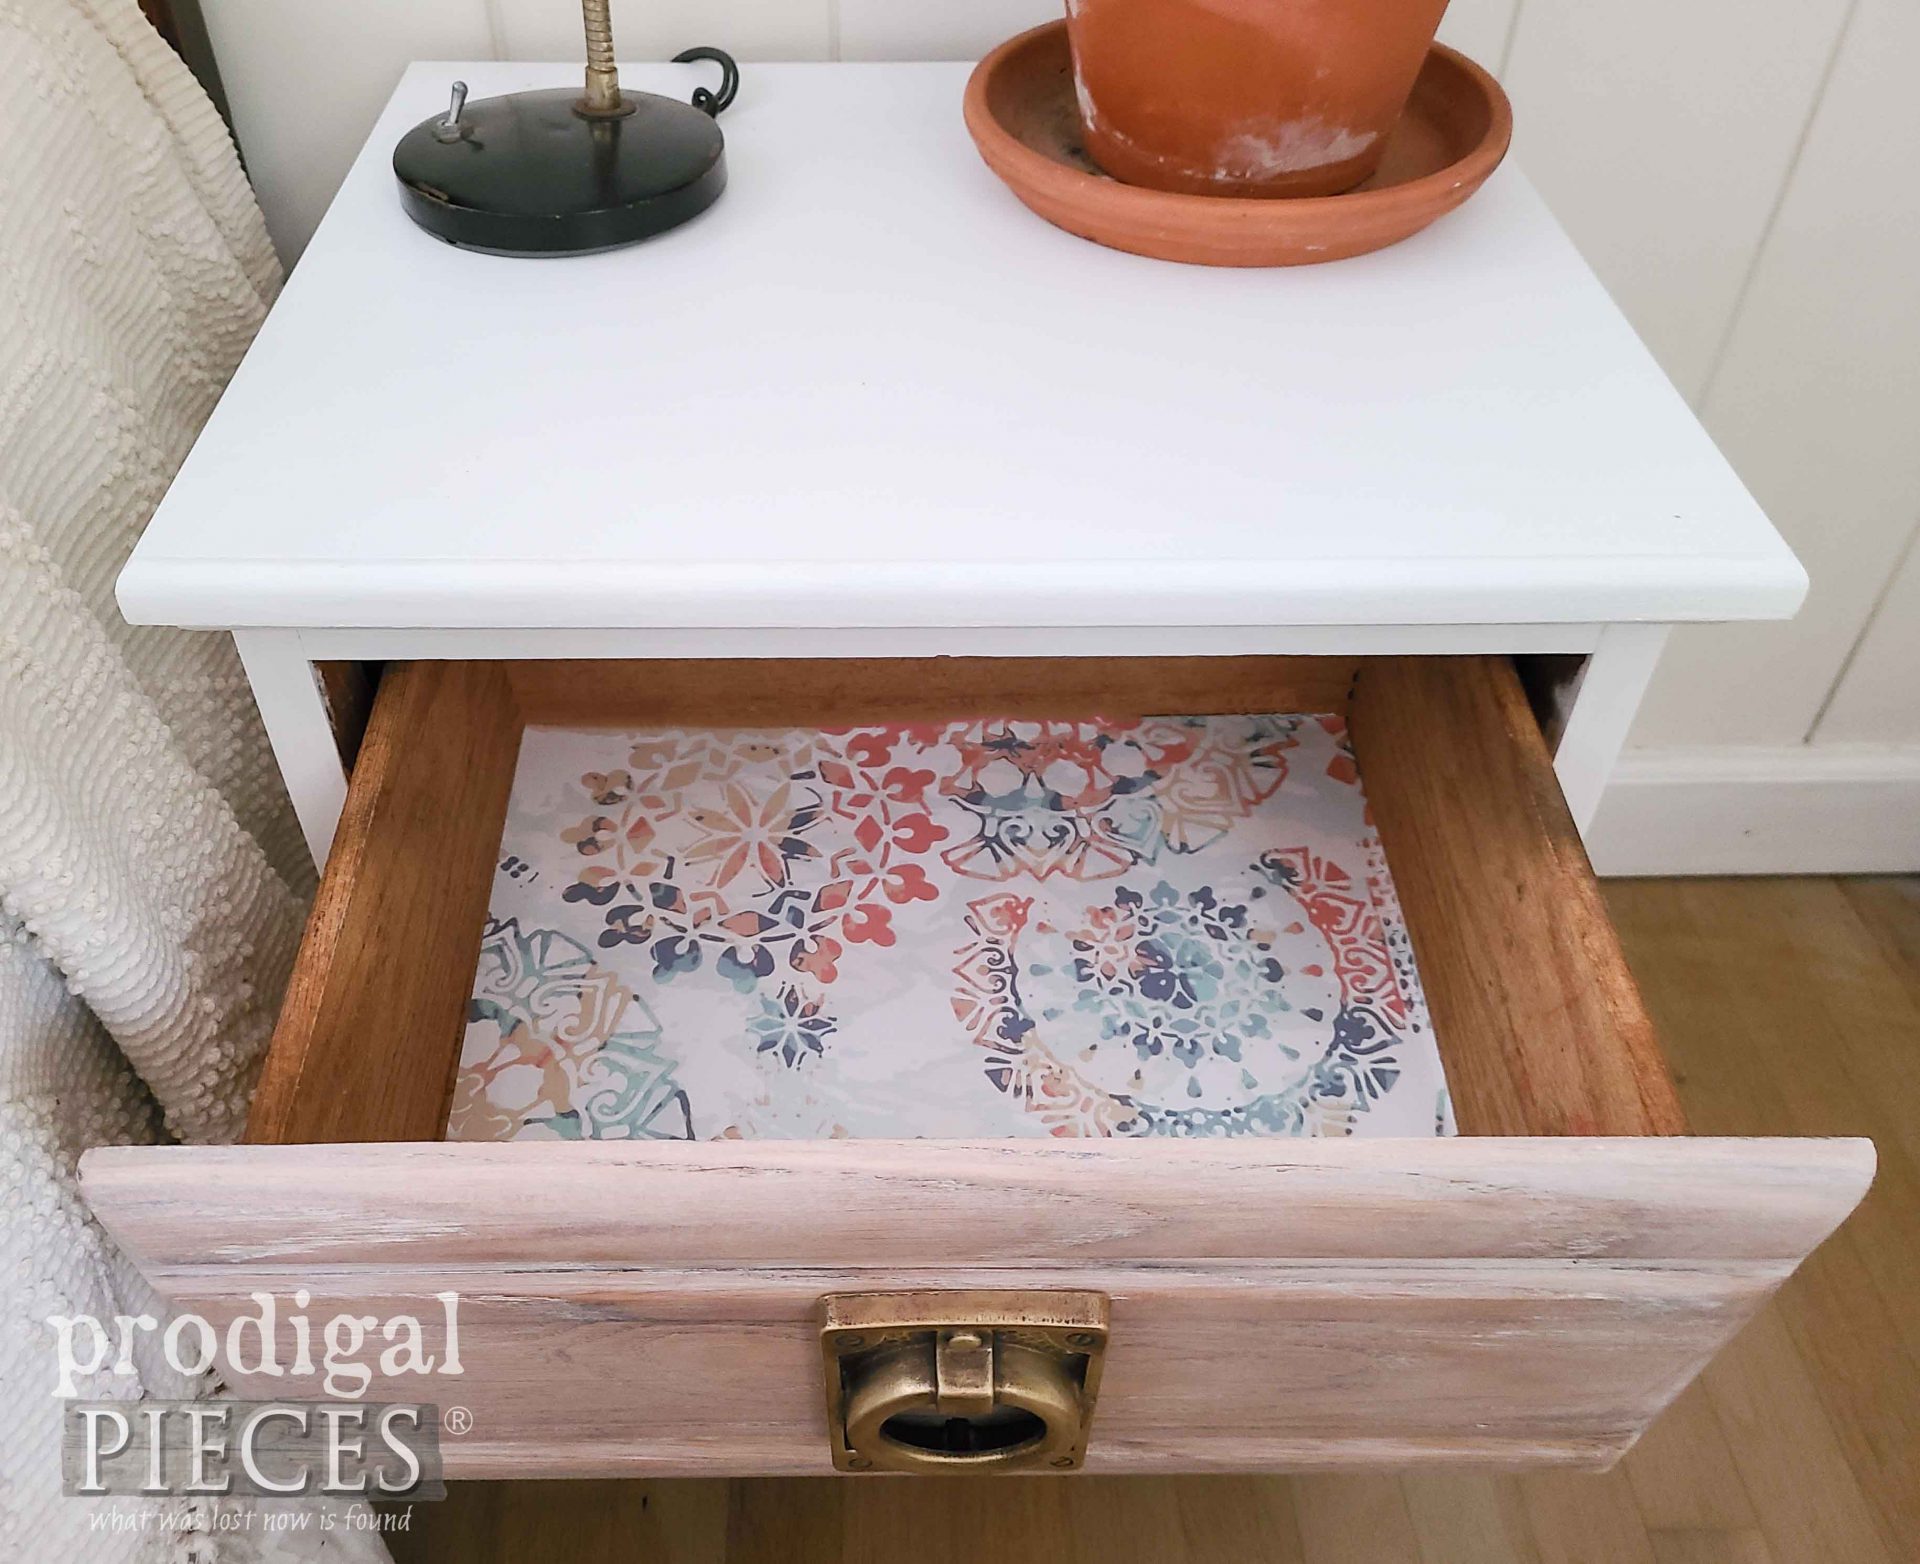 Paper Line Dated Vintage Nightstand by Larissa of Prodigal Pieces | prodigalpieces.com #prodigalpieces #vintage #furniture #bedroom